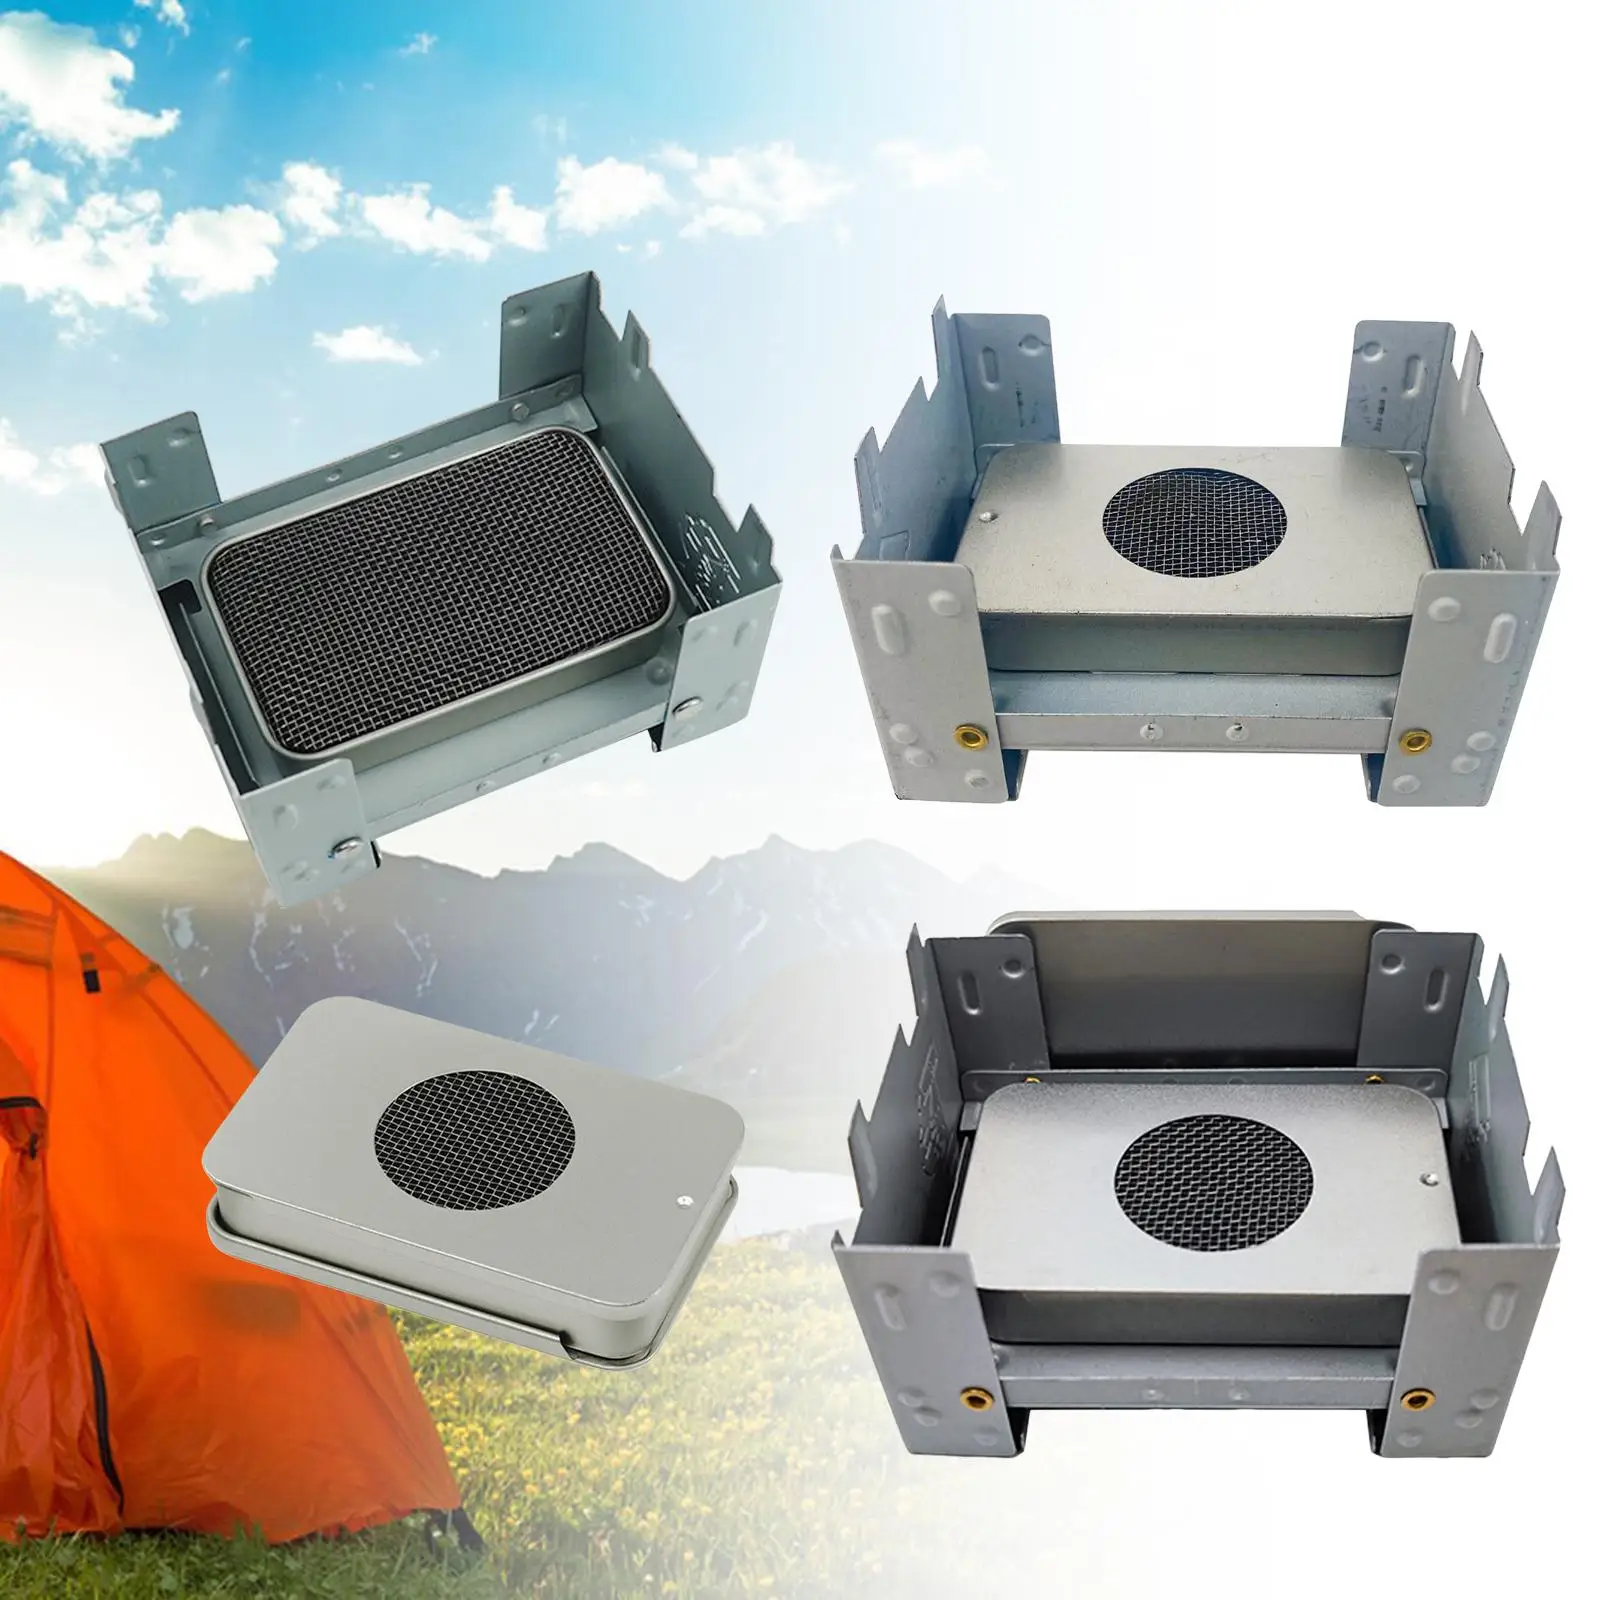 Alcohol Camping Stoves Lightweight Stainless Steel Camp Stoves for Picnic Camping